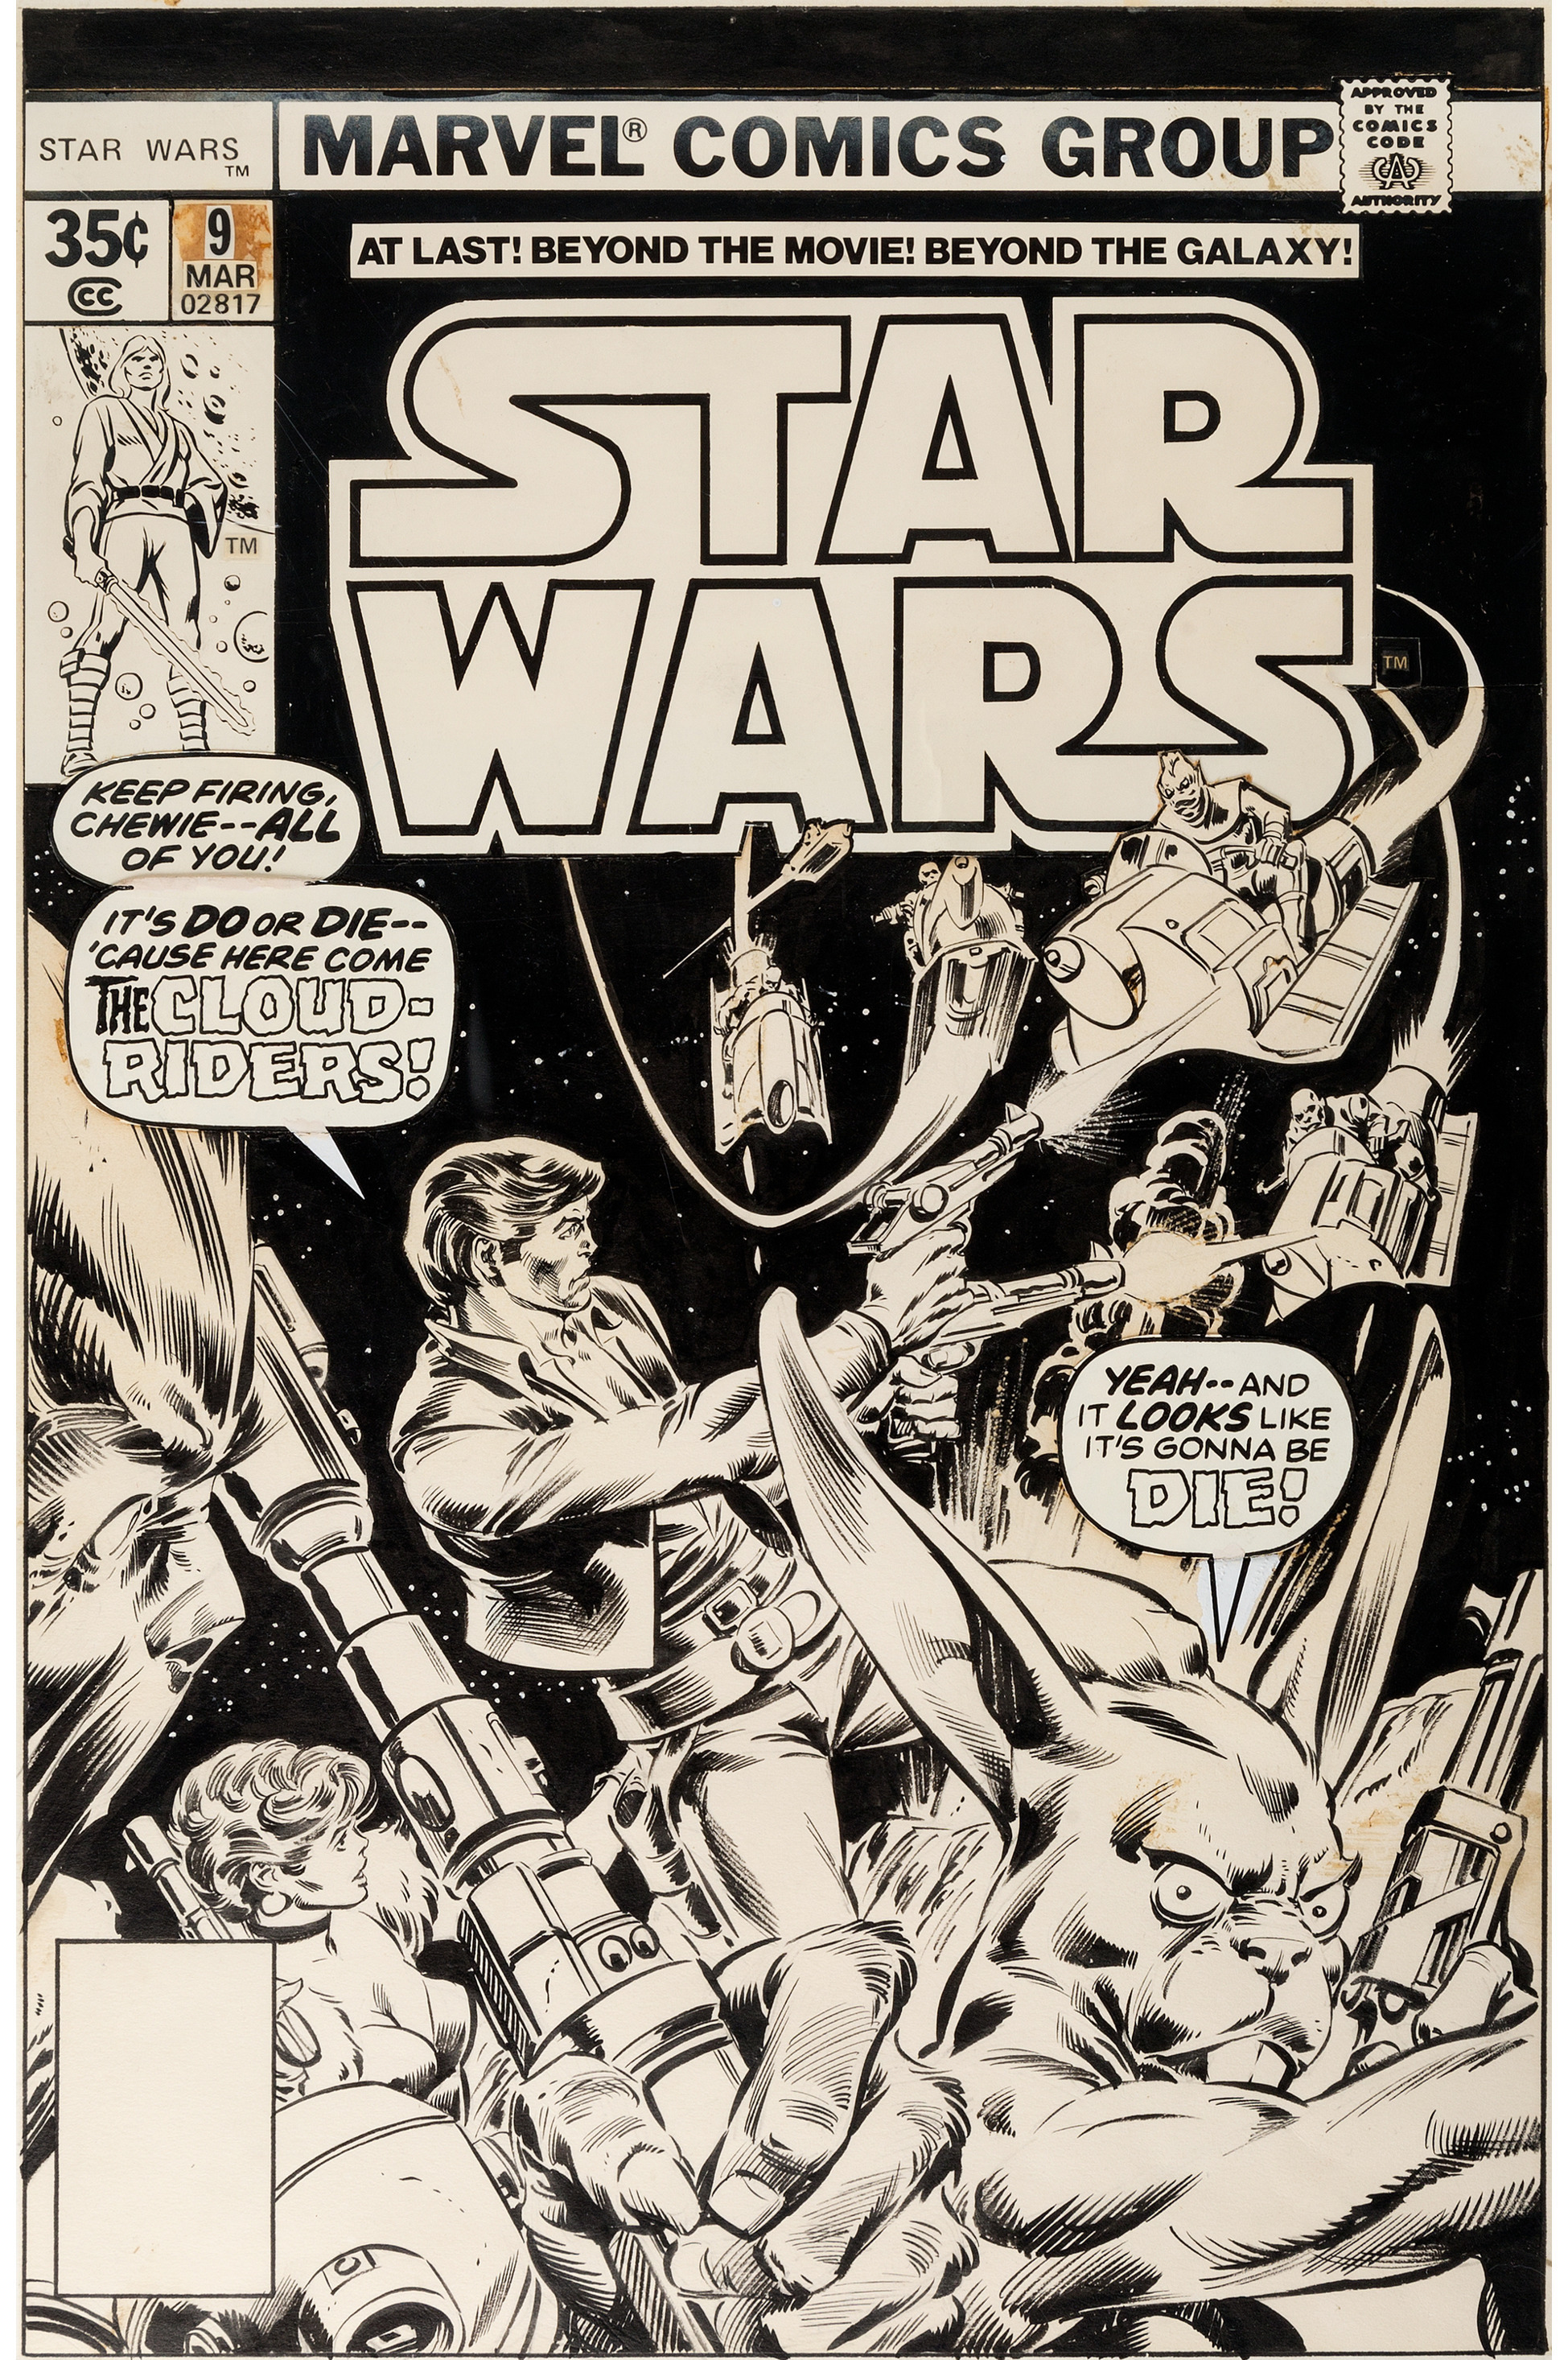 Star Wars #9 cover by Gil Kane